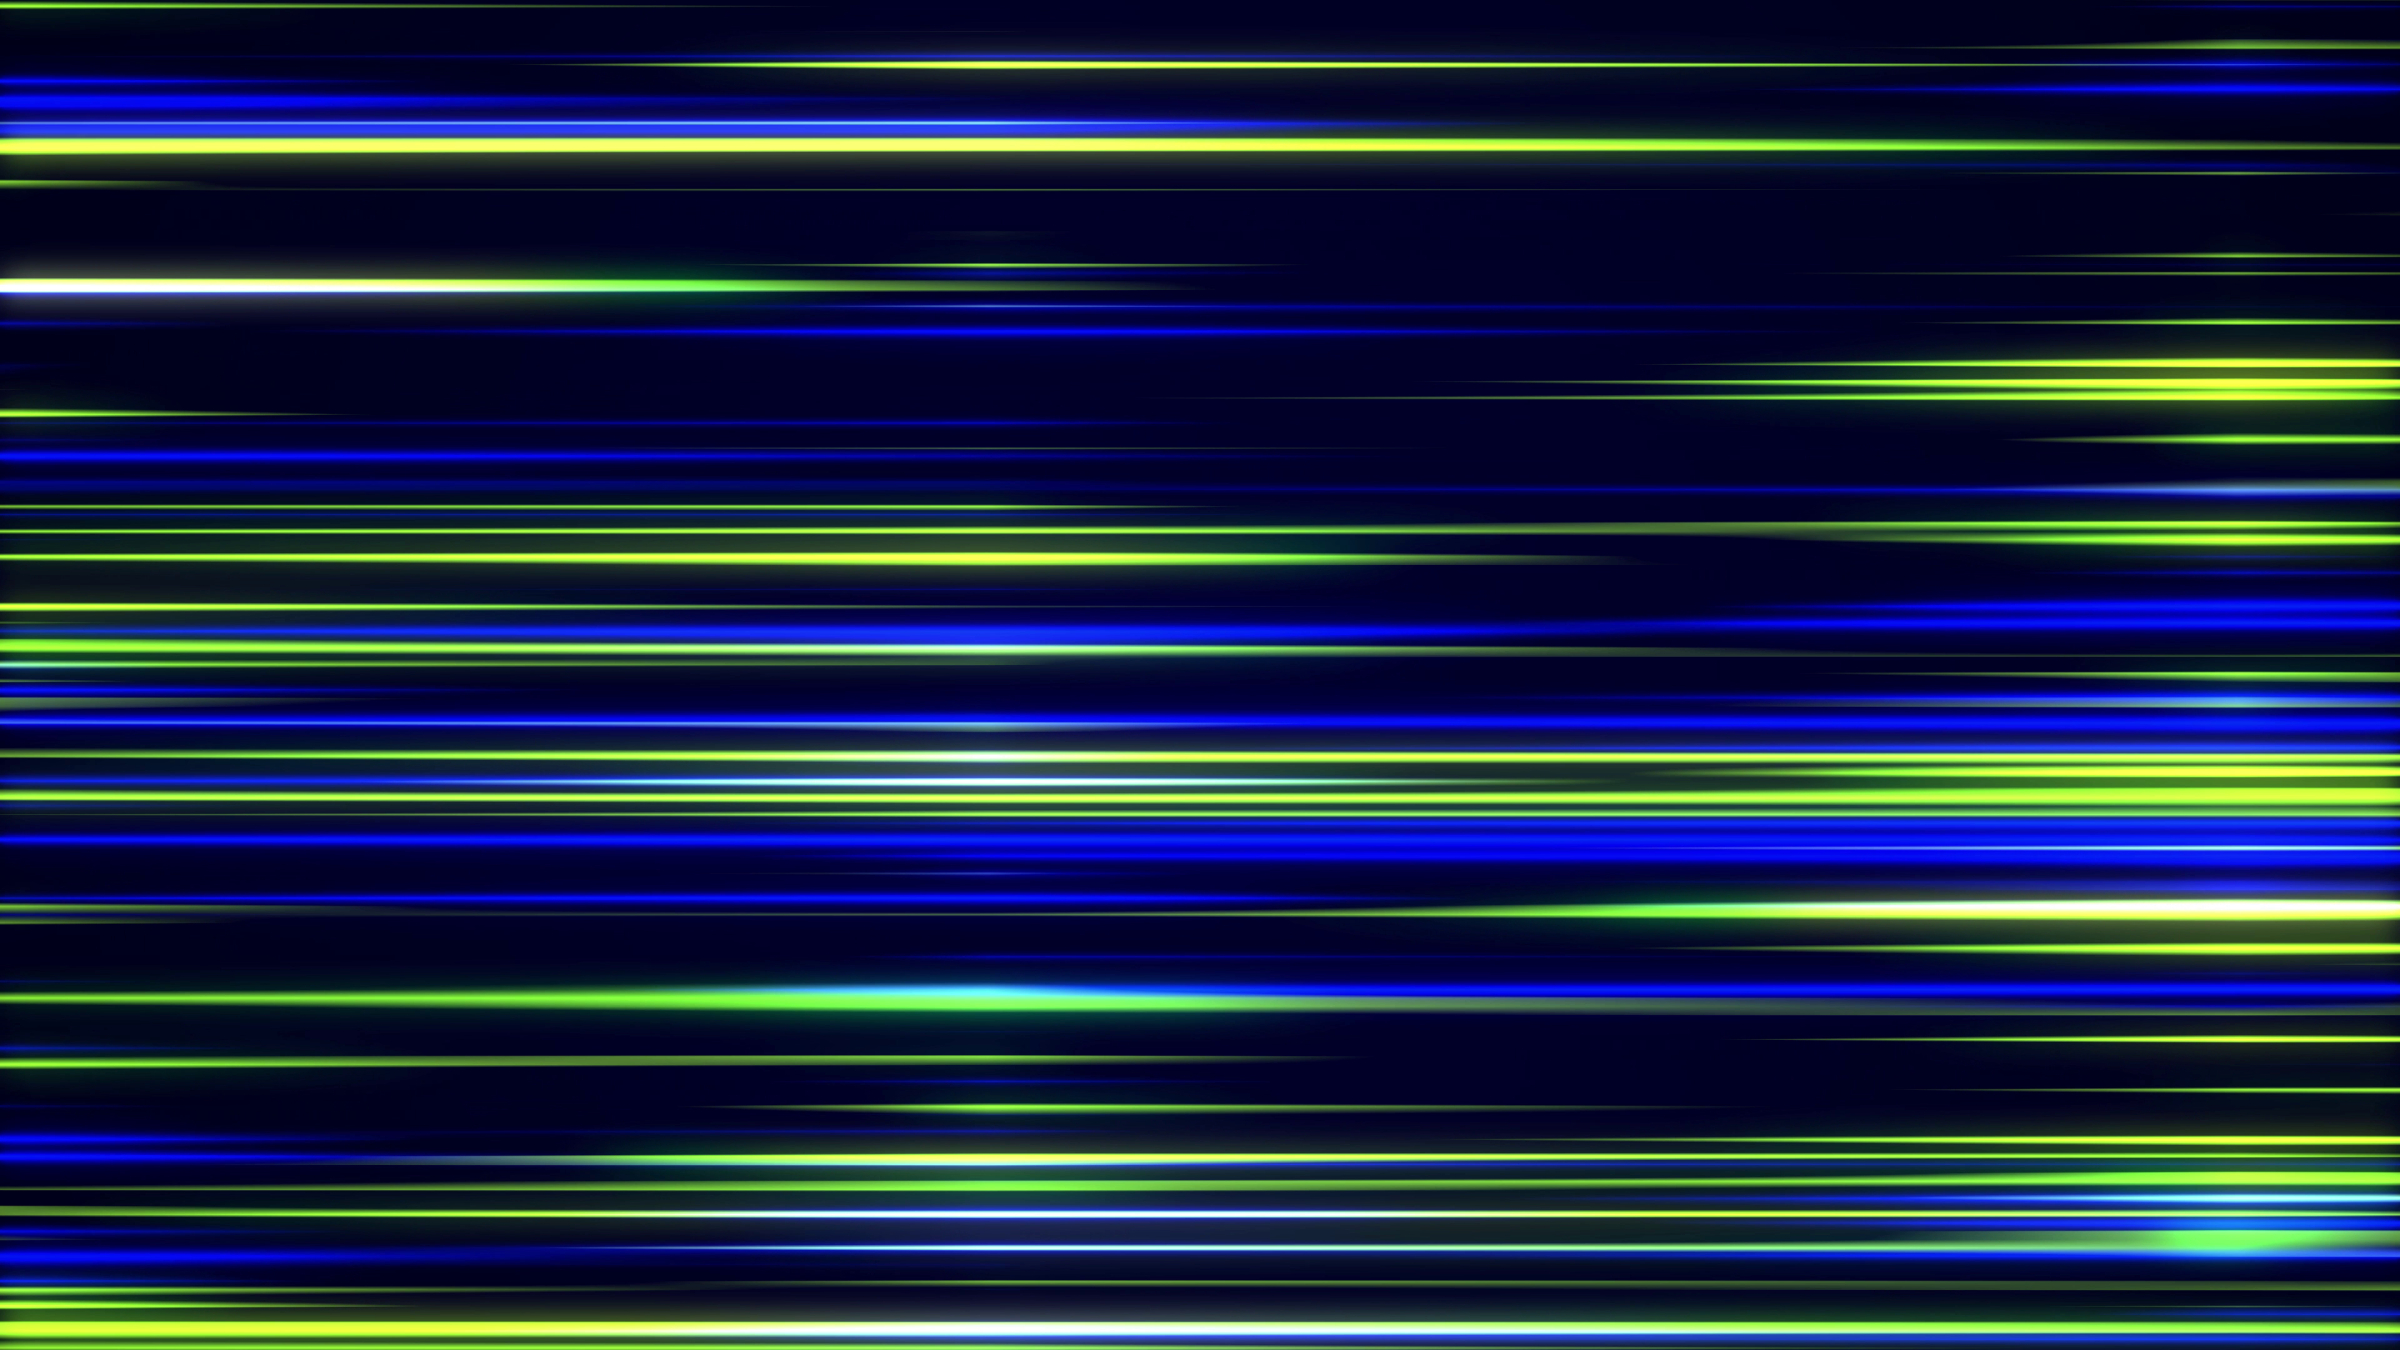 Blue & Green Lines Motion Background || VFX Free To Use 4K Screensaver || FREE DOWNLOAD